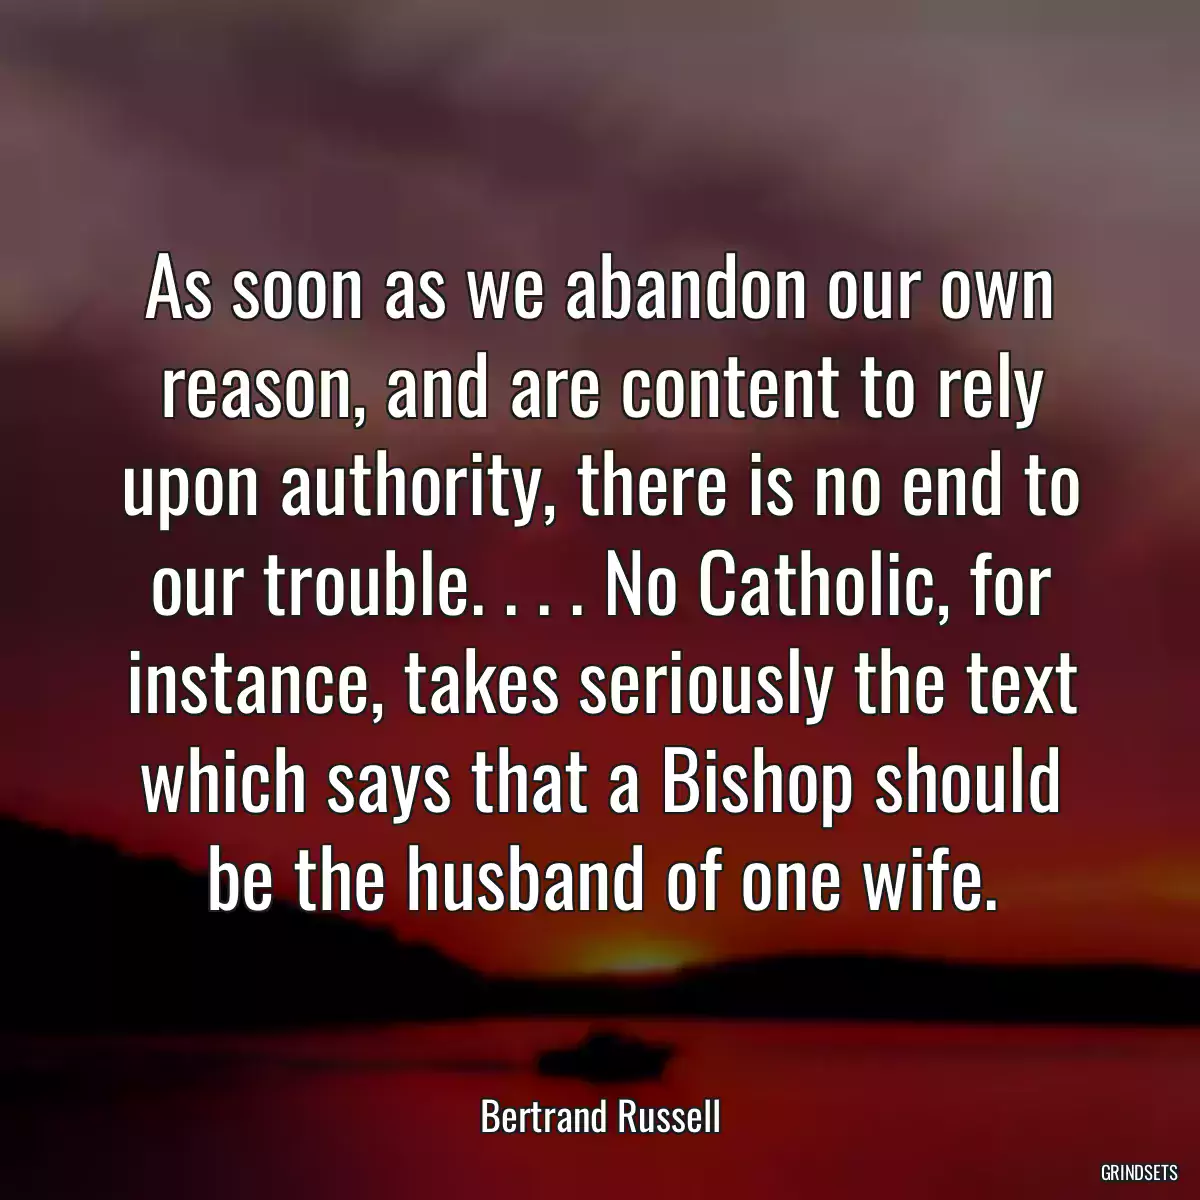 As soon as we abandon our own reason, and are content to rely upon authority, there is no end to our trouble. . . . No Catholic, for instance, takes seriously the text which says that a Bishop should be the husband of one wife.